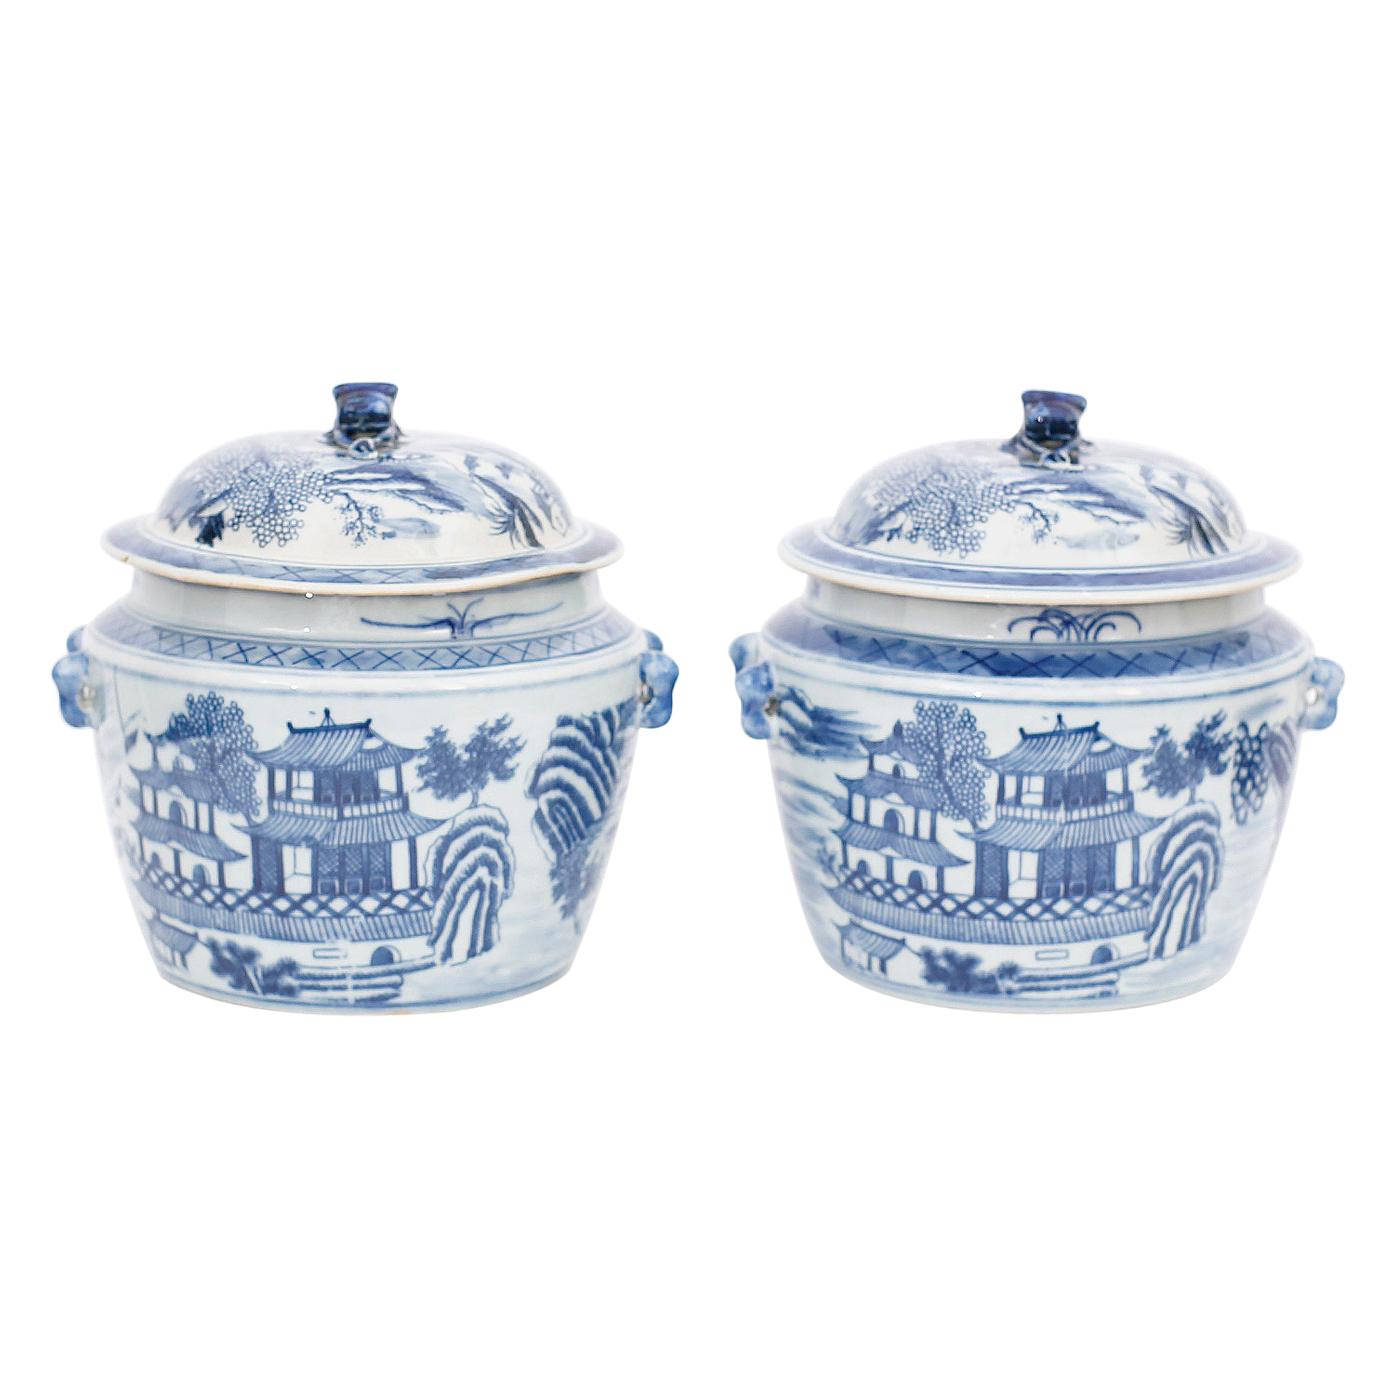 Pair of Blue and White Porcelain Pots with Pagodas